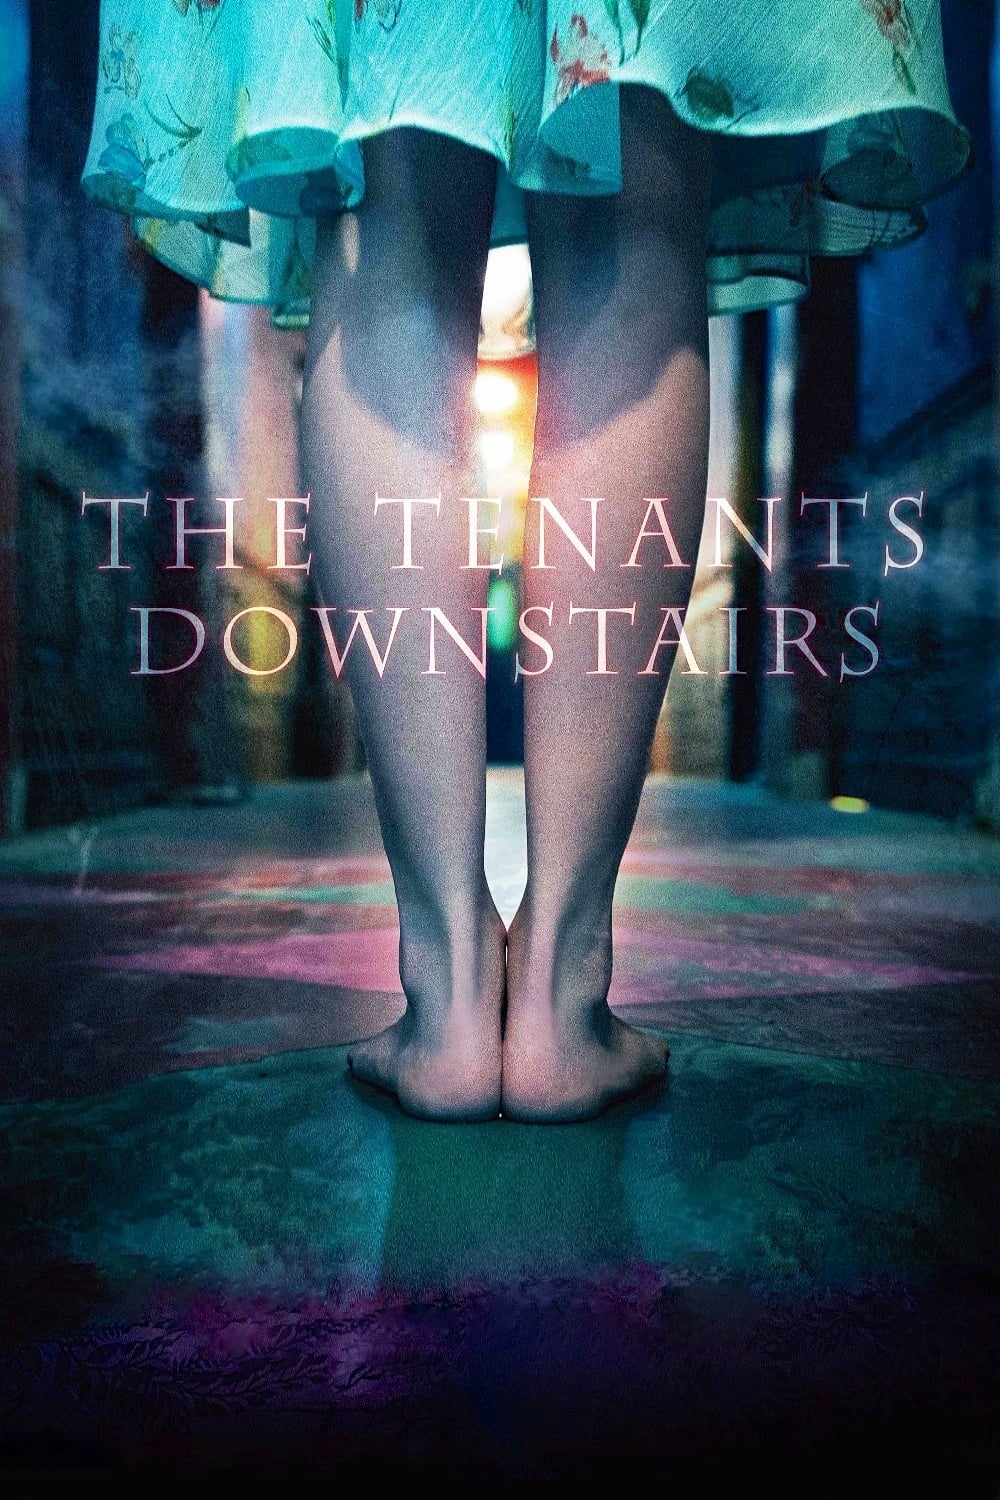 The Tenants Downstairs (2016)